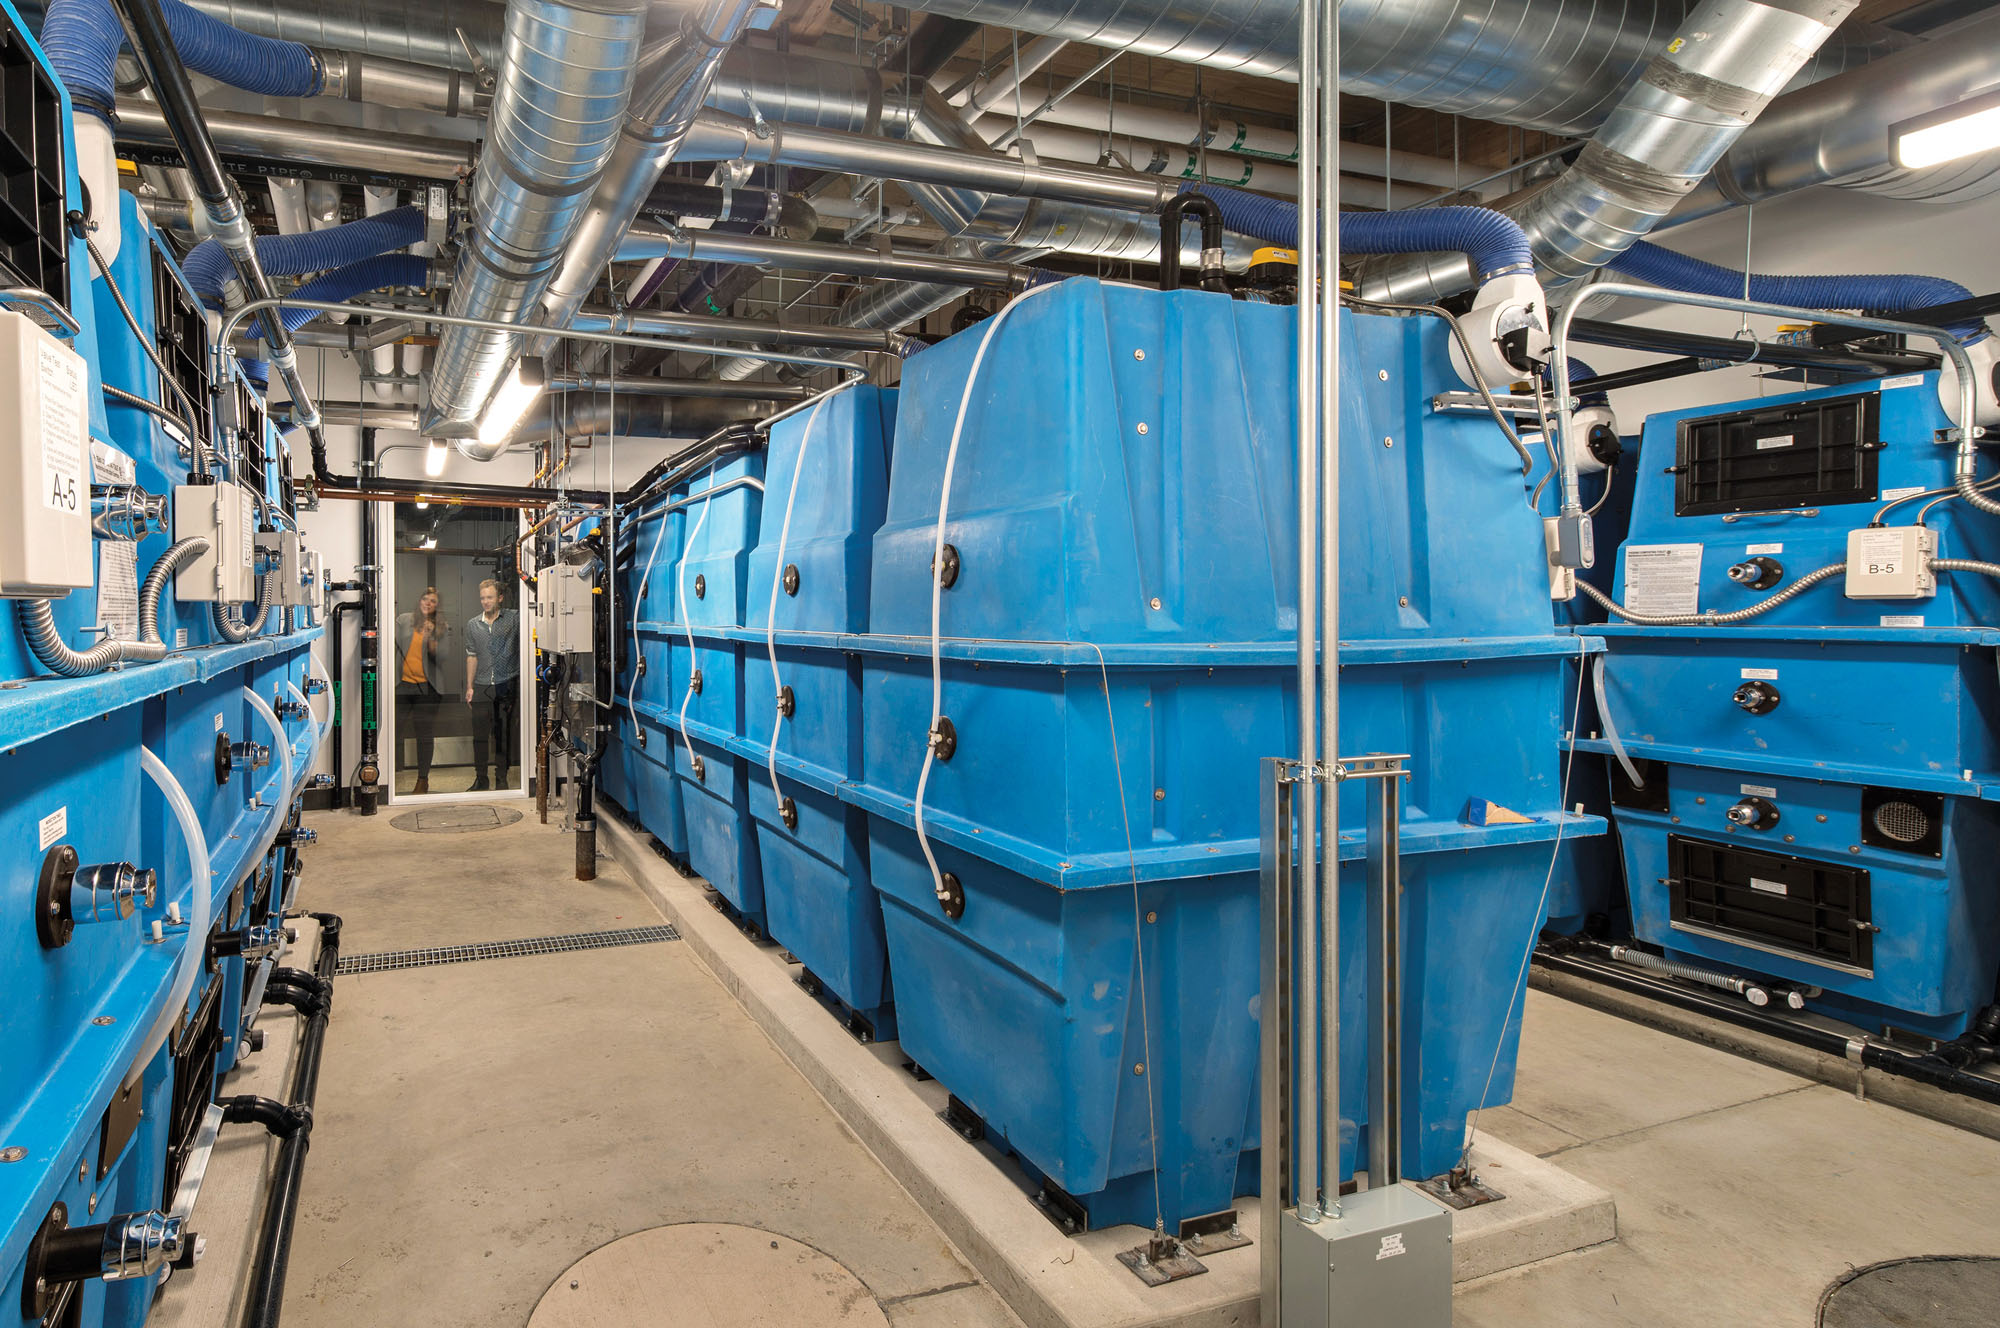 A photograph of the PAE Living Building's water recycling room features rows of blue plastic tanks